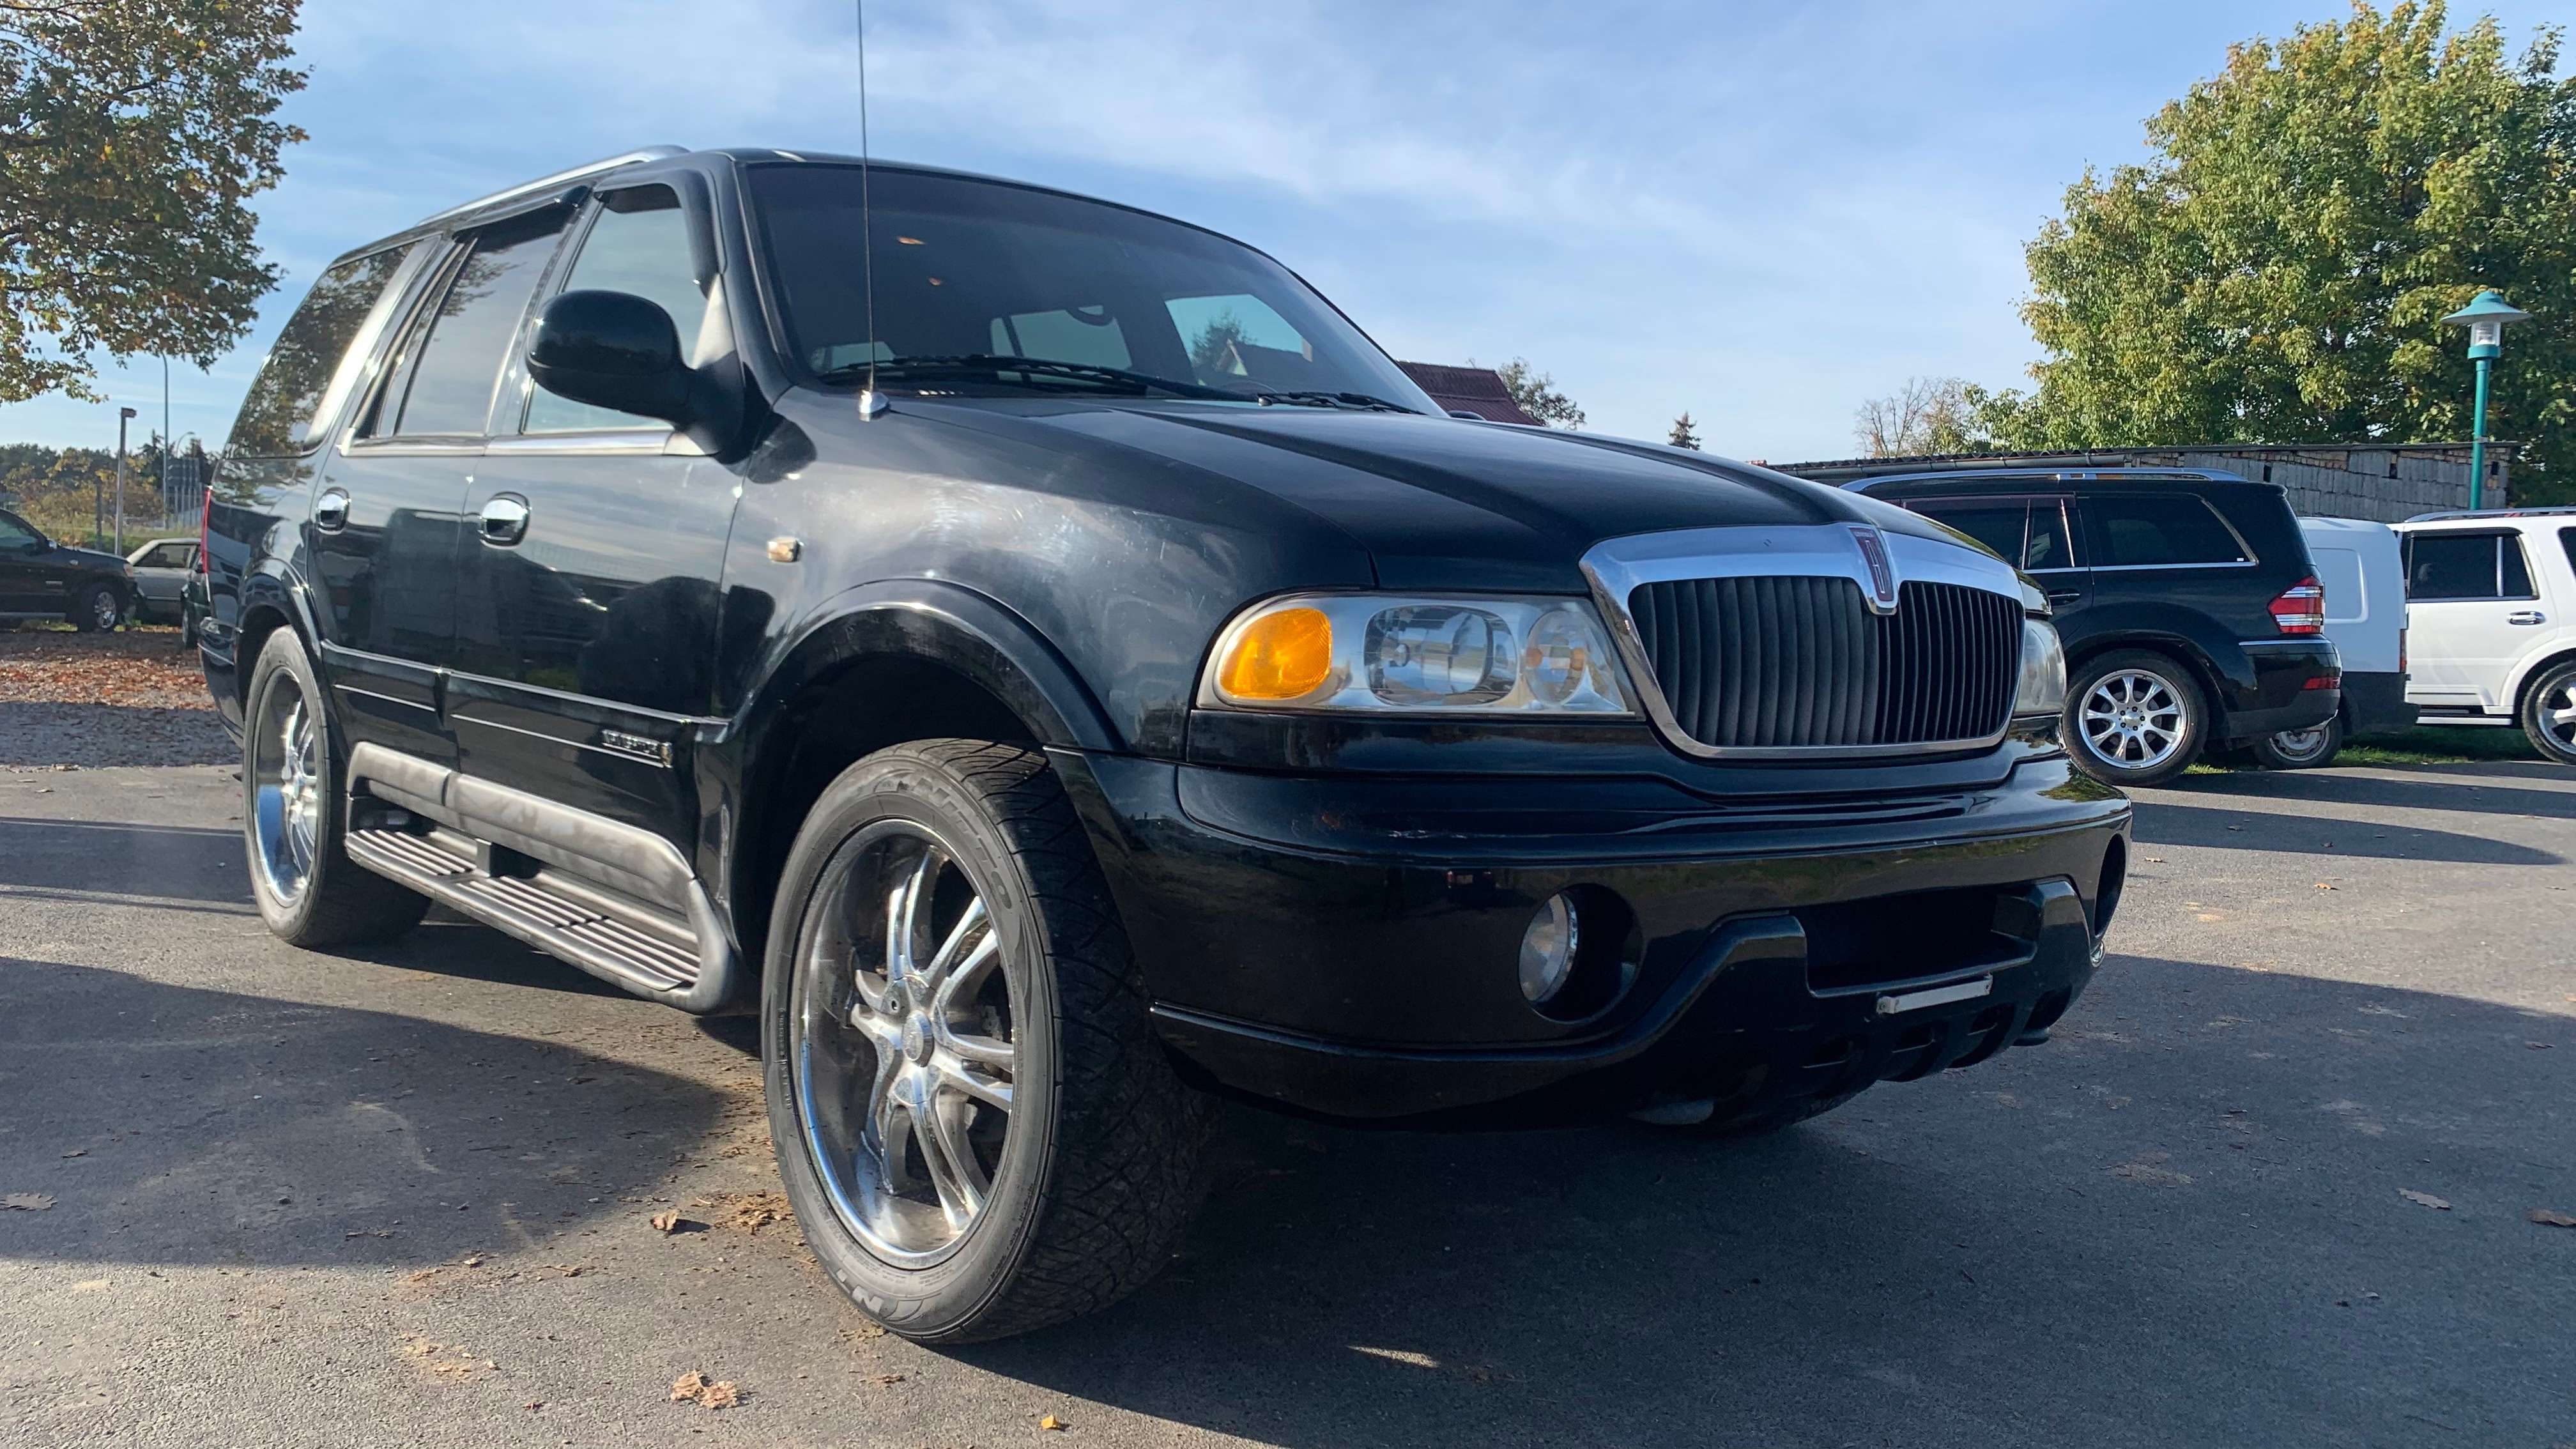 Lincoln Navigator Off-Road/Pick-up in Black used in Dahlewitz for € 10,900.-